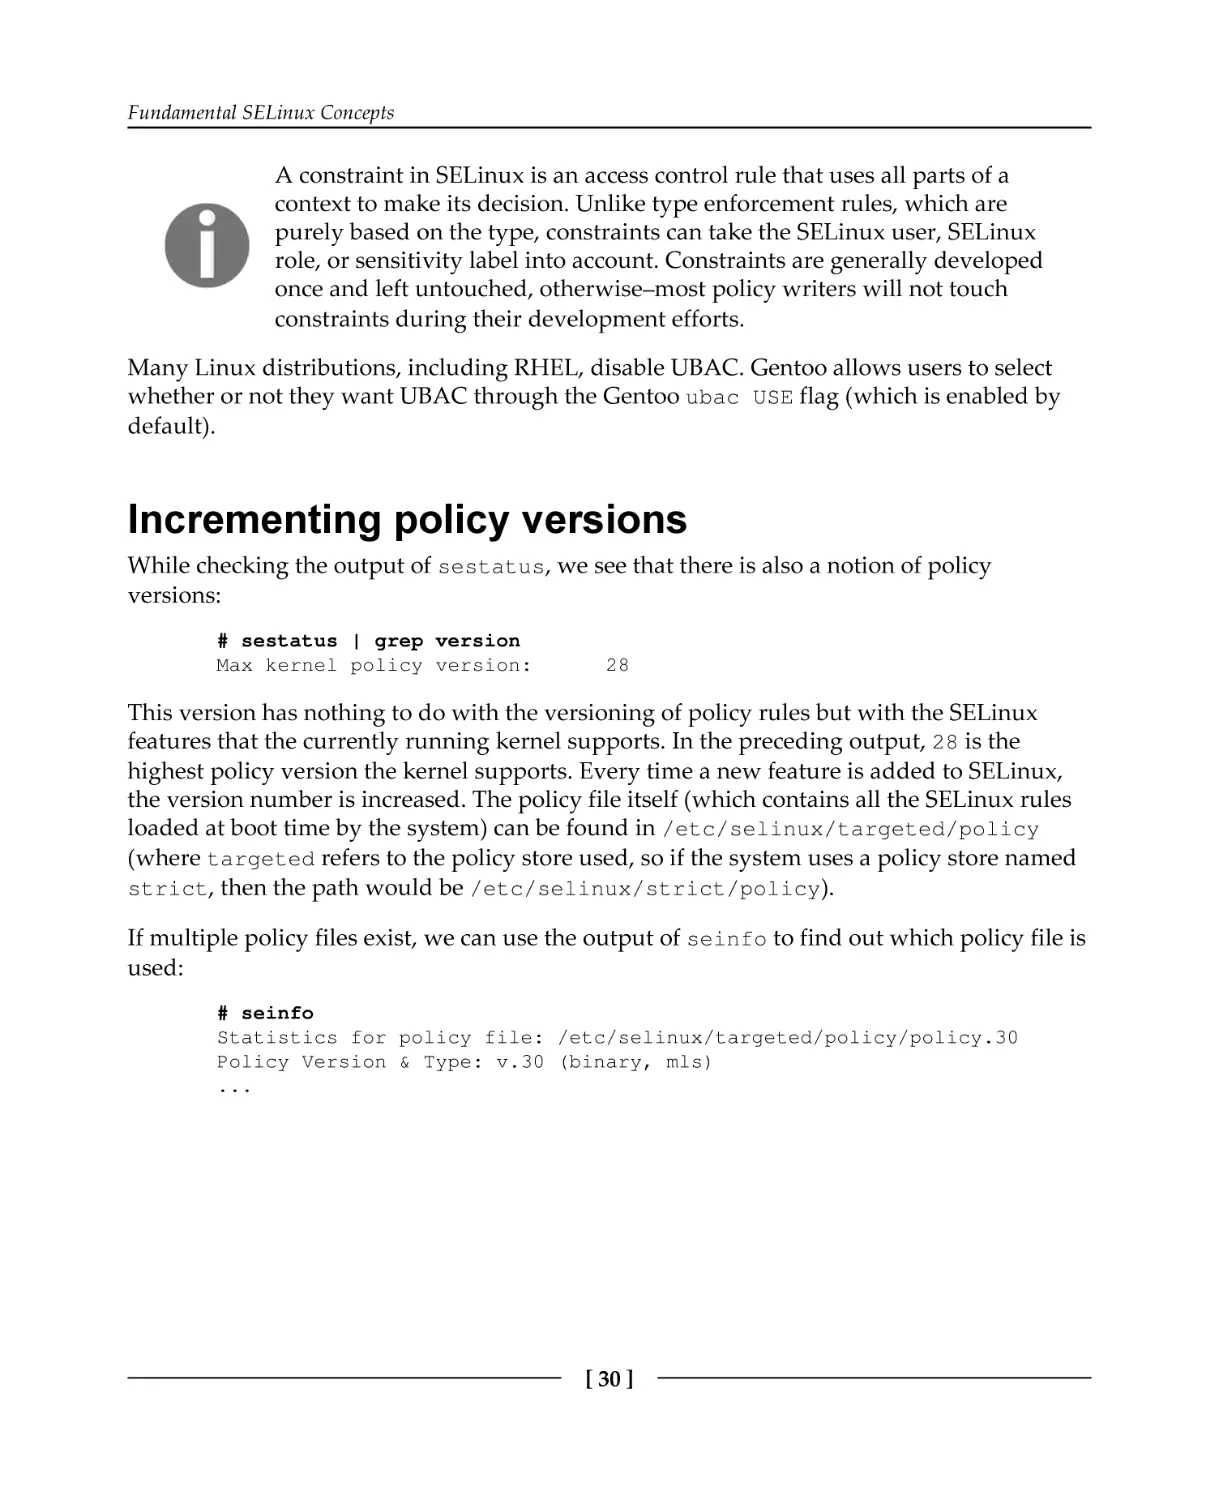 Incrementing policy versions